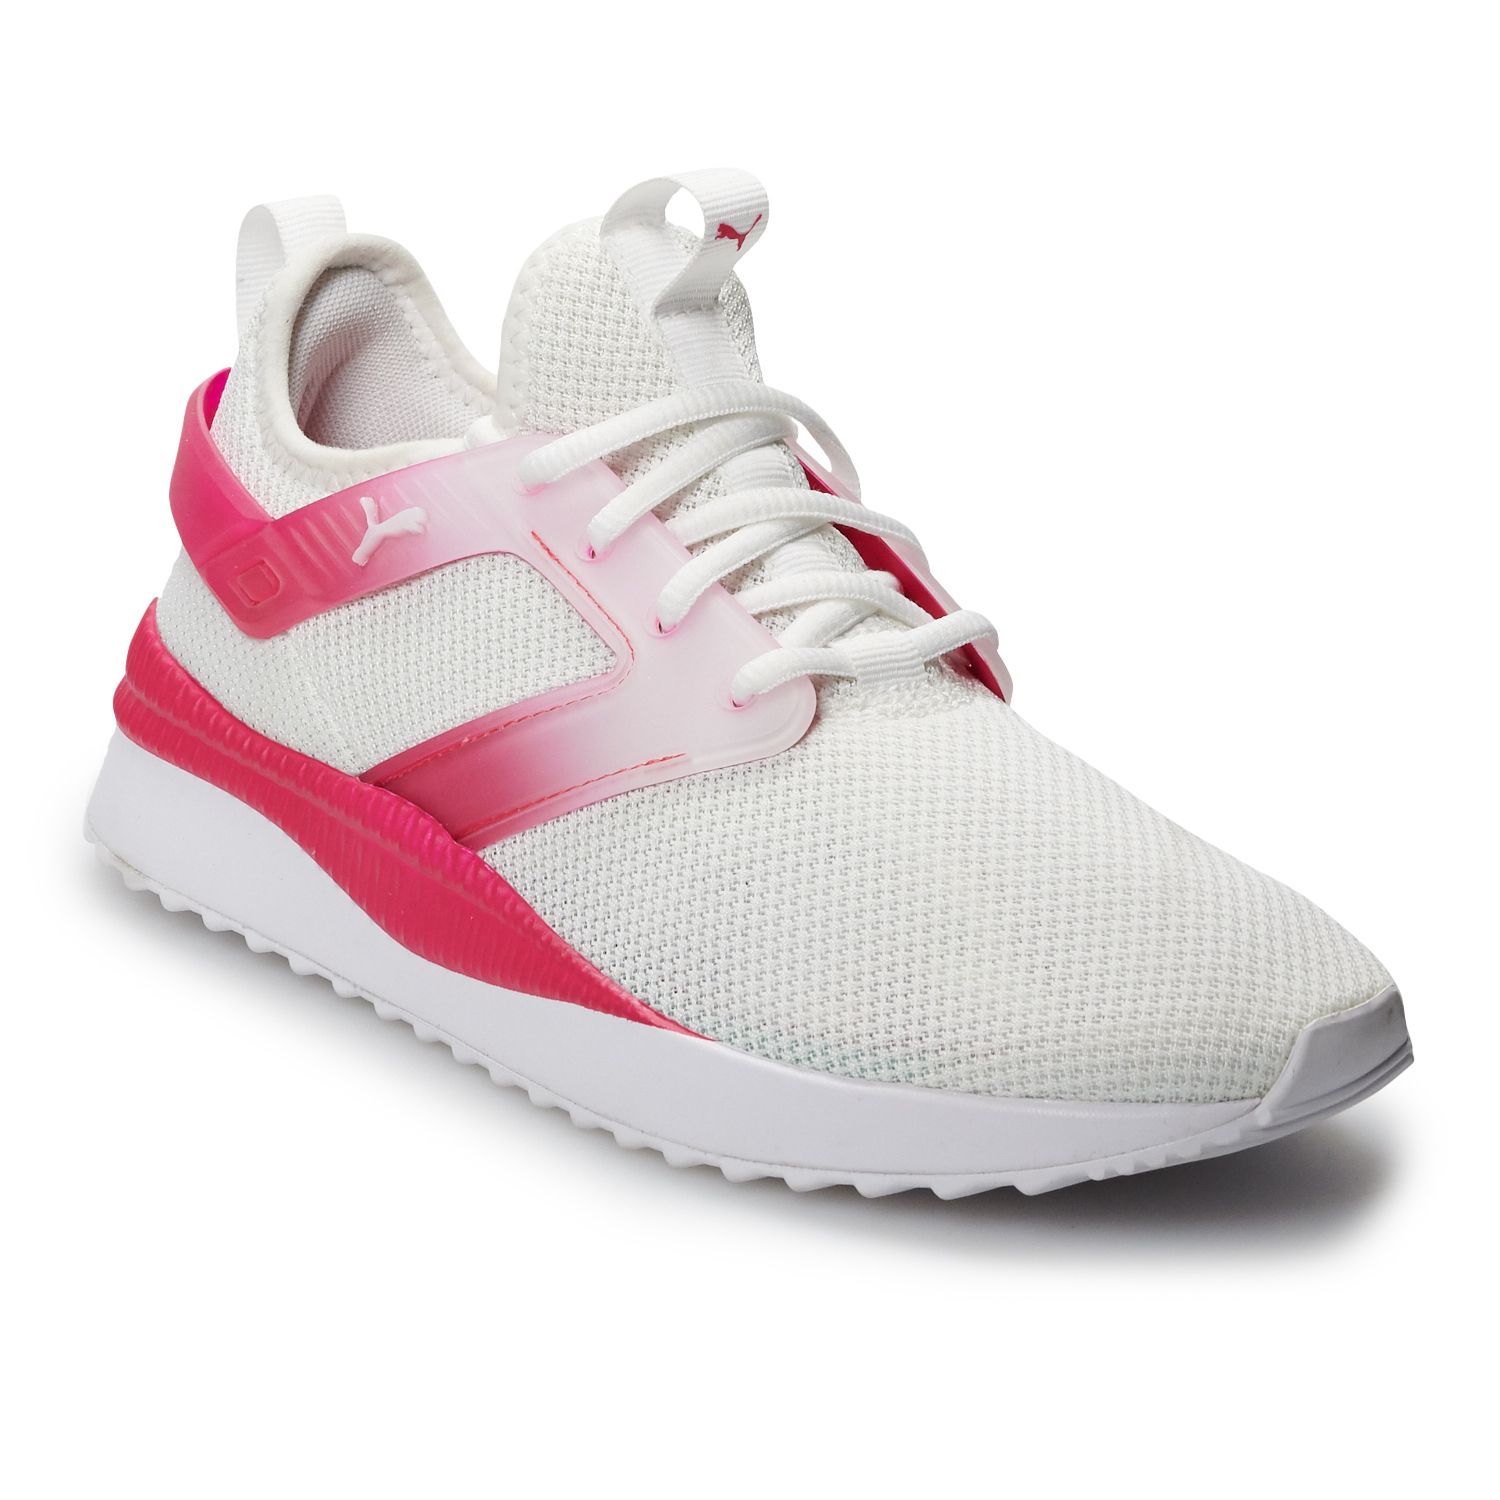 PUMA Pacer Next Excel Women's Running Shoes